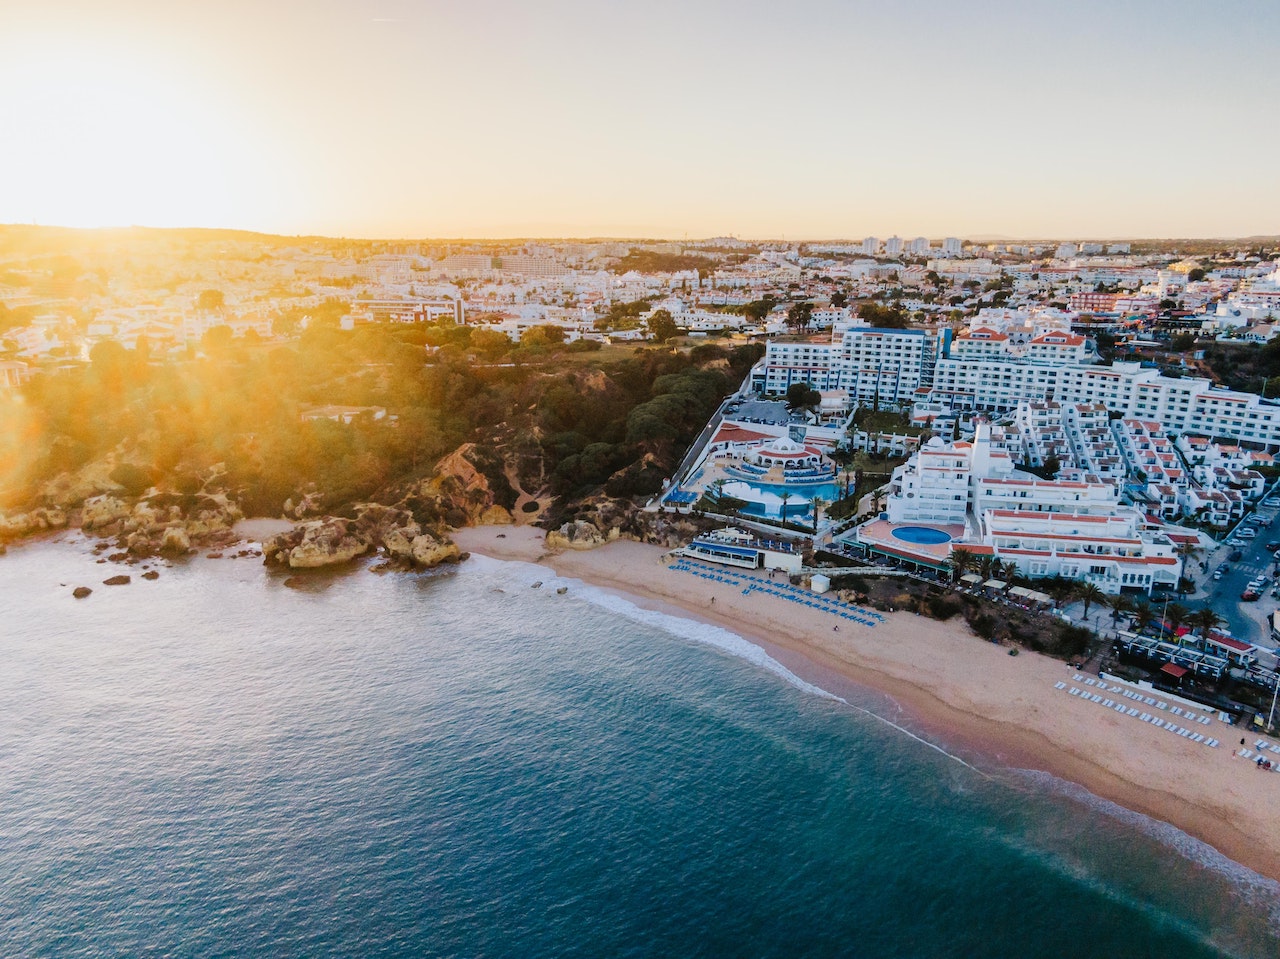 Portugal’s illustrious coastline just got a bit more upscale with the arrival of W Algarve, says Helen Dalley